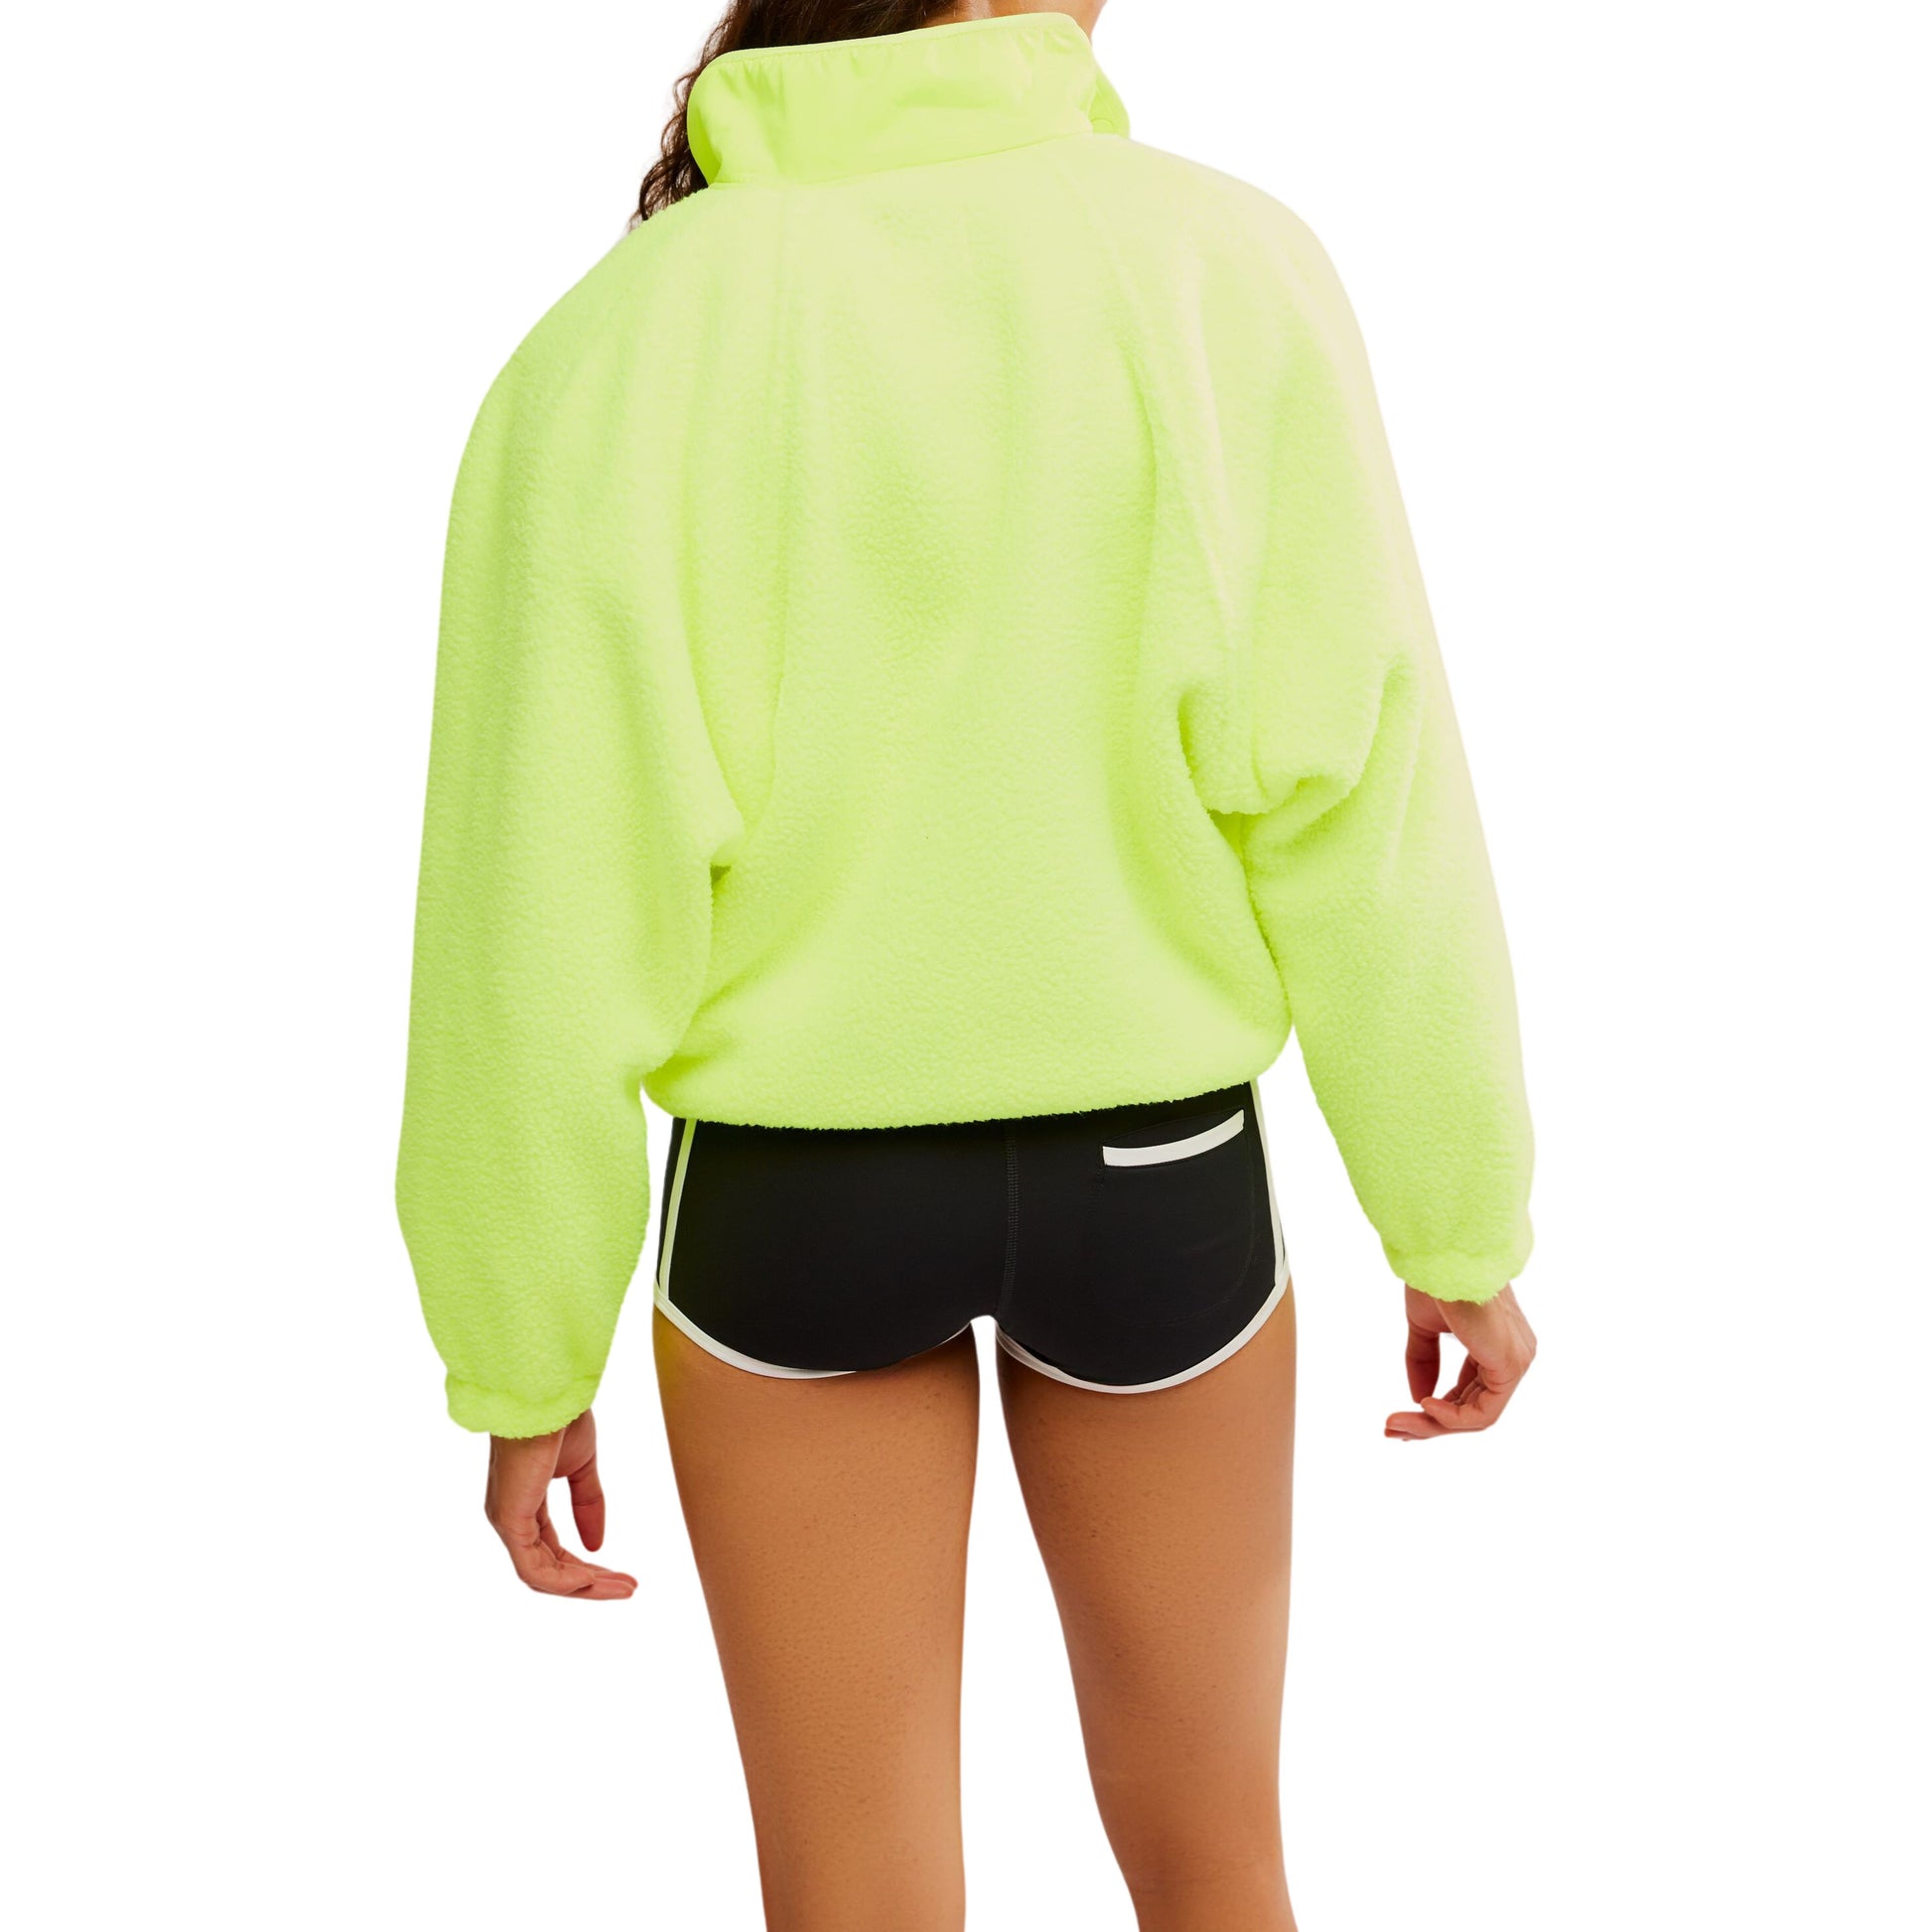 Woman from behind wearing a Free People Movement Hit The Slopes Jacket in Highlighter with zippered pockets and black athletic shorts with white trim.